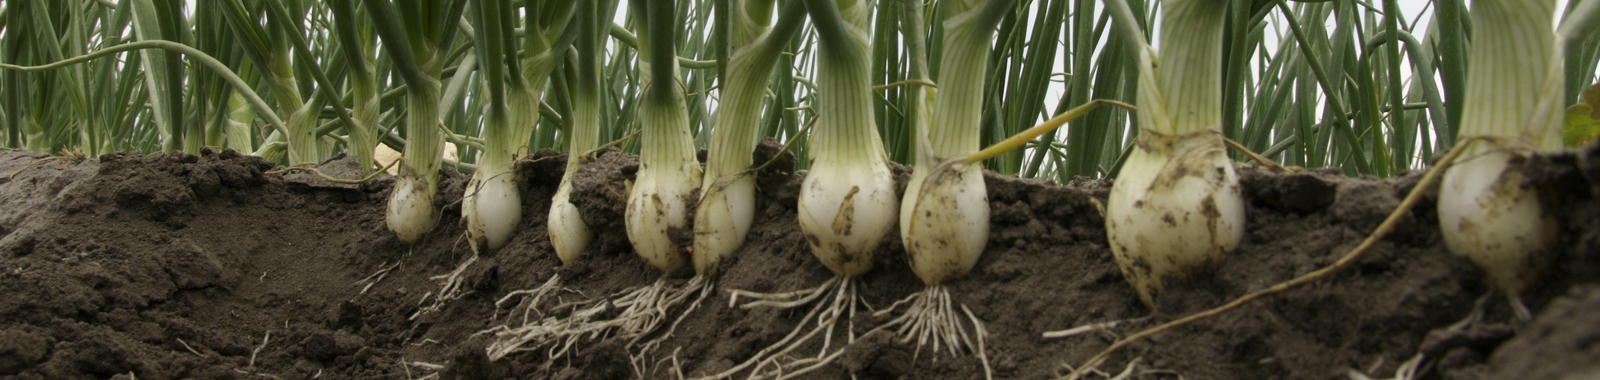 Role of Iron in Onion Production